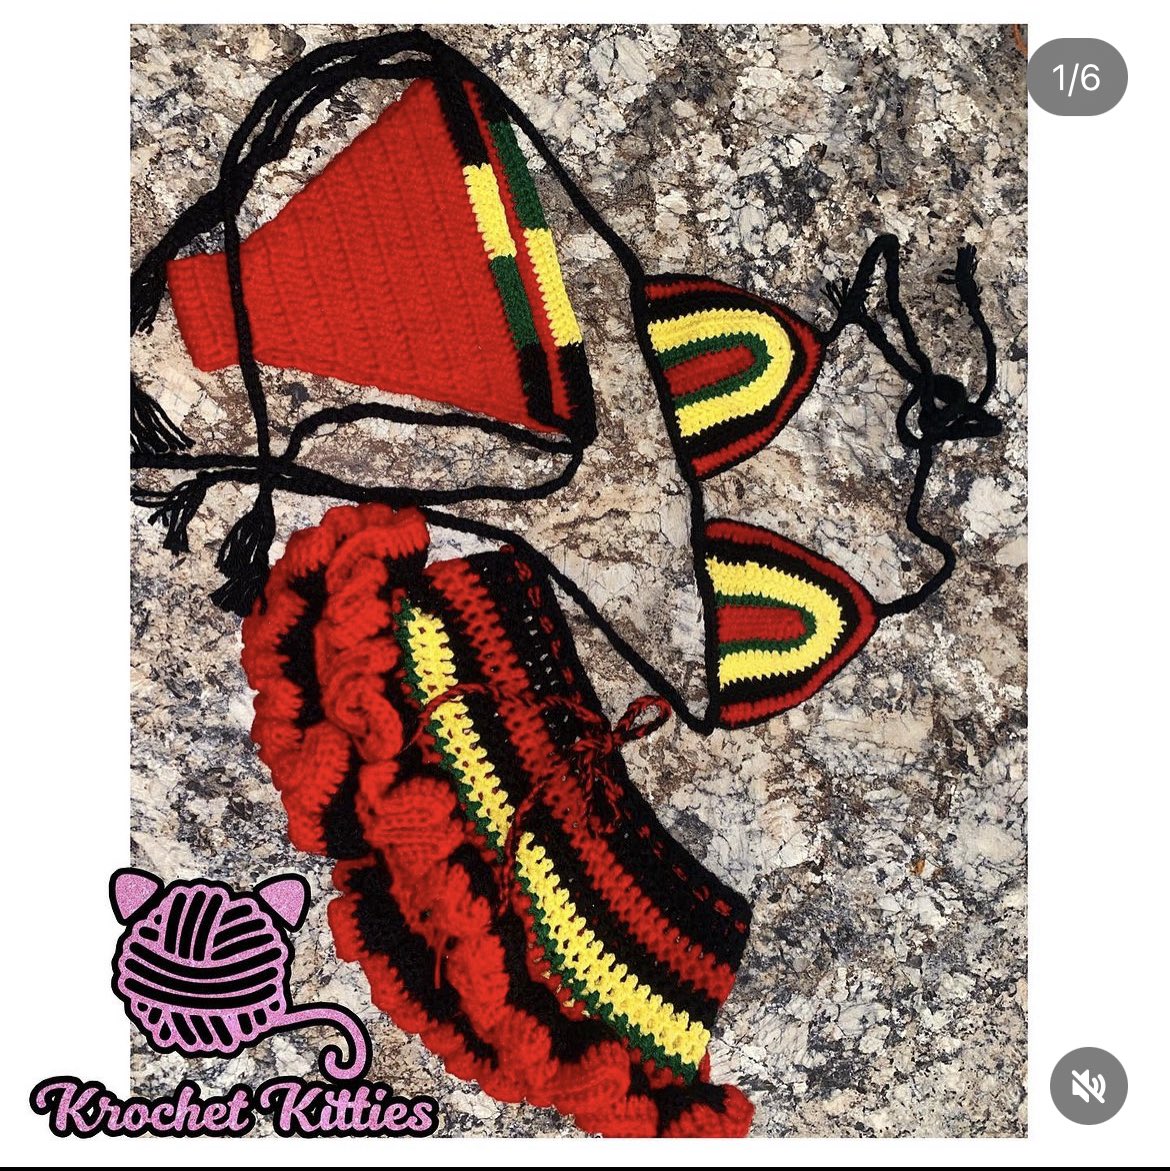 Booked your trip? Get a cute crochet set to step out with 😍❤️‍🔥🖤
#crochet #bookatrip